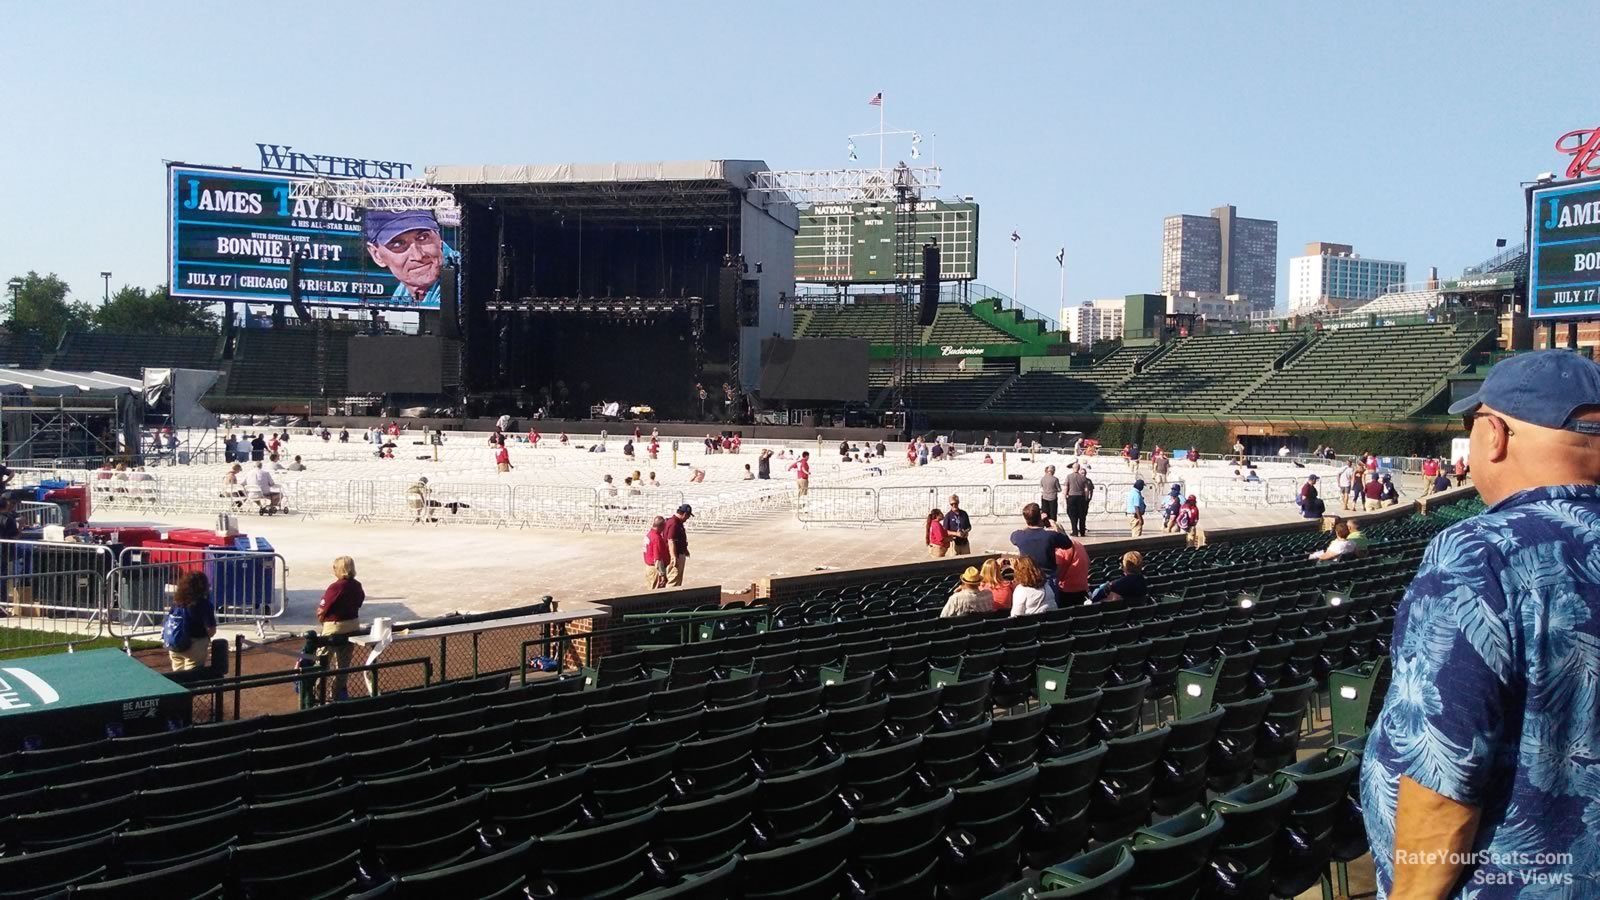 section 24, row 10 seat view  for concert - wrigley field